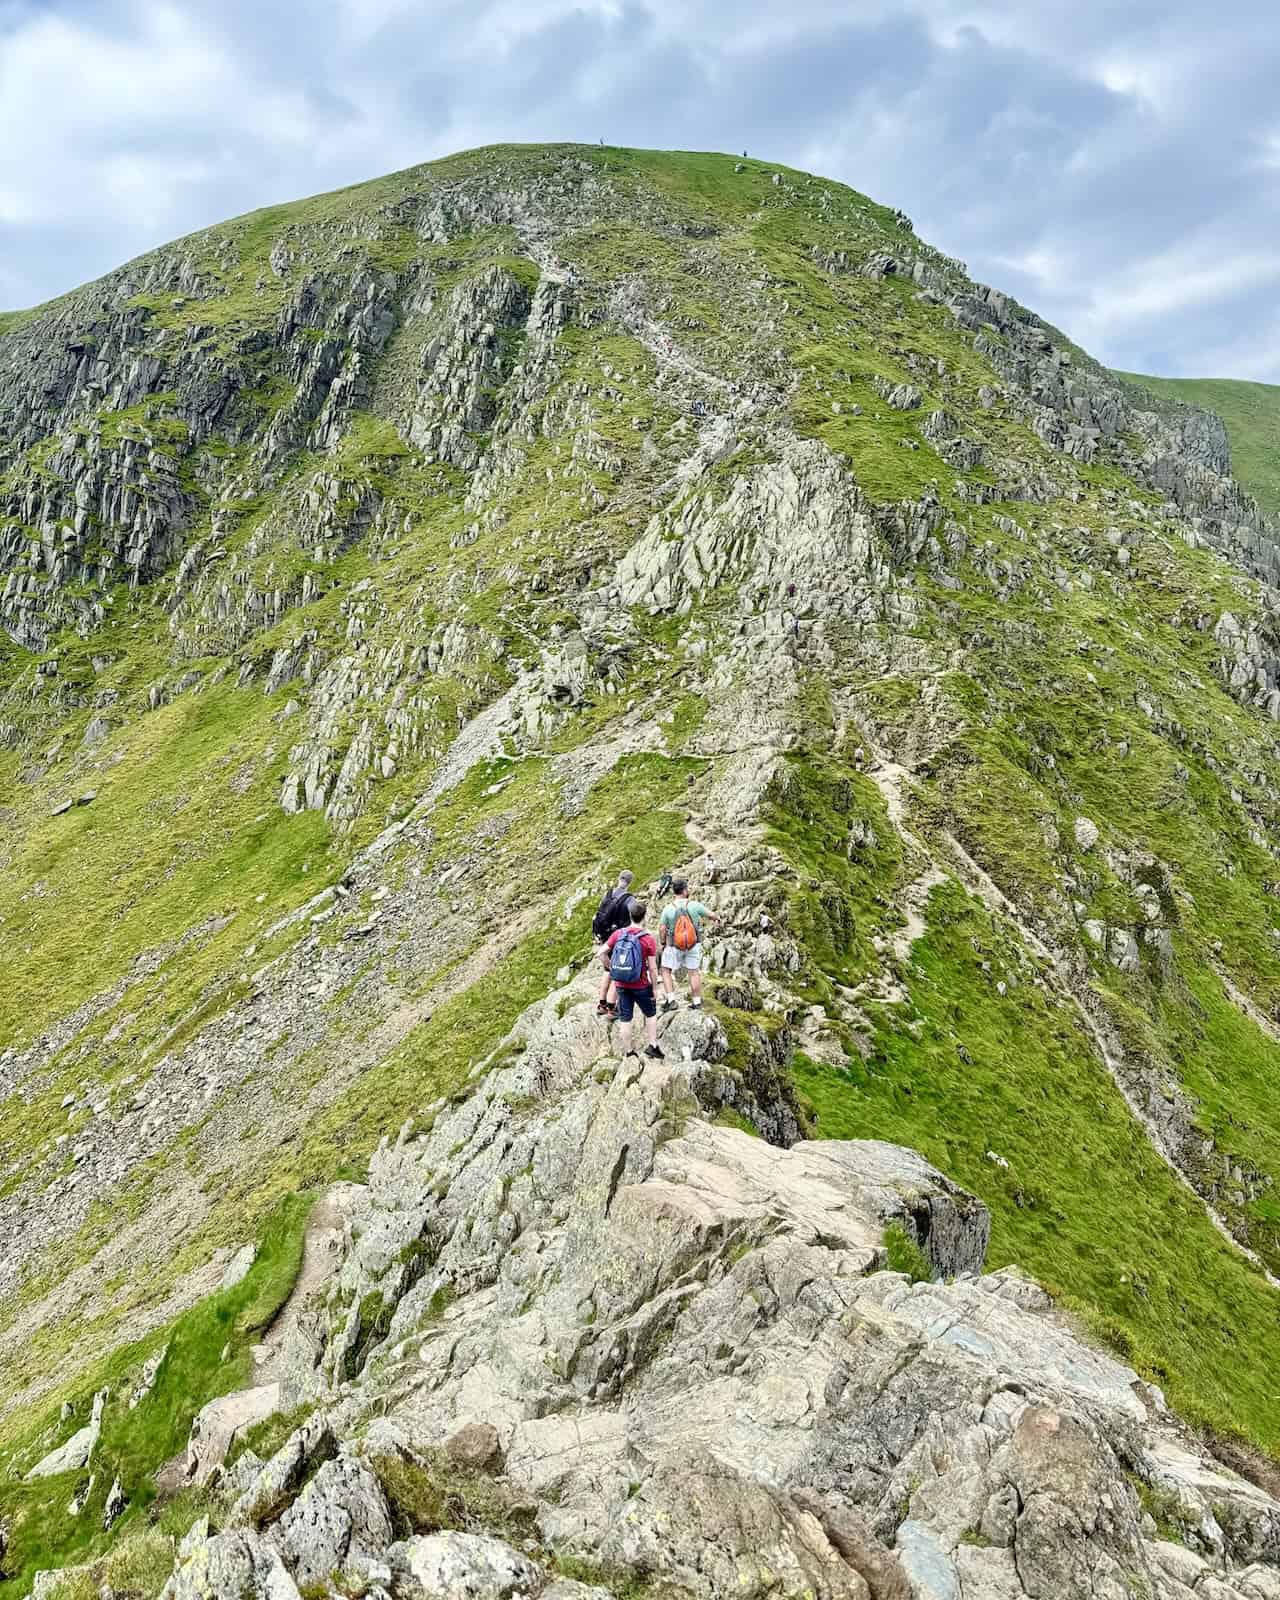 Continuing across the ridge, we look west towards the summit, part of the exhilarating Helvellyn via Striding Edge trek.